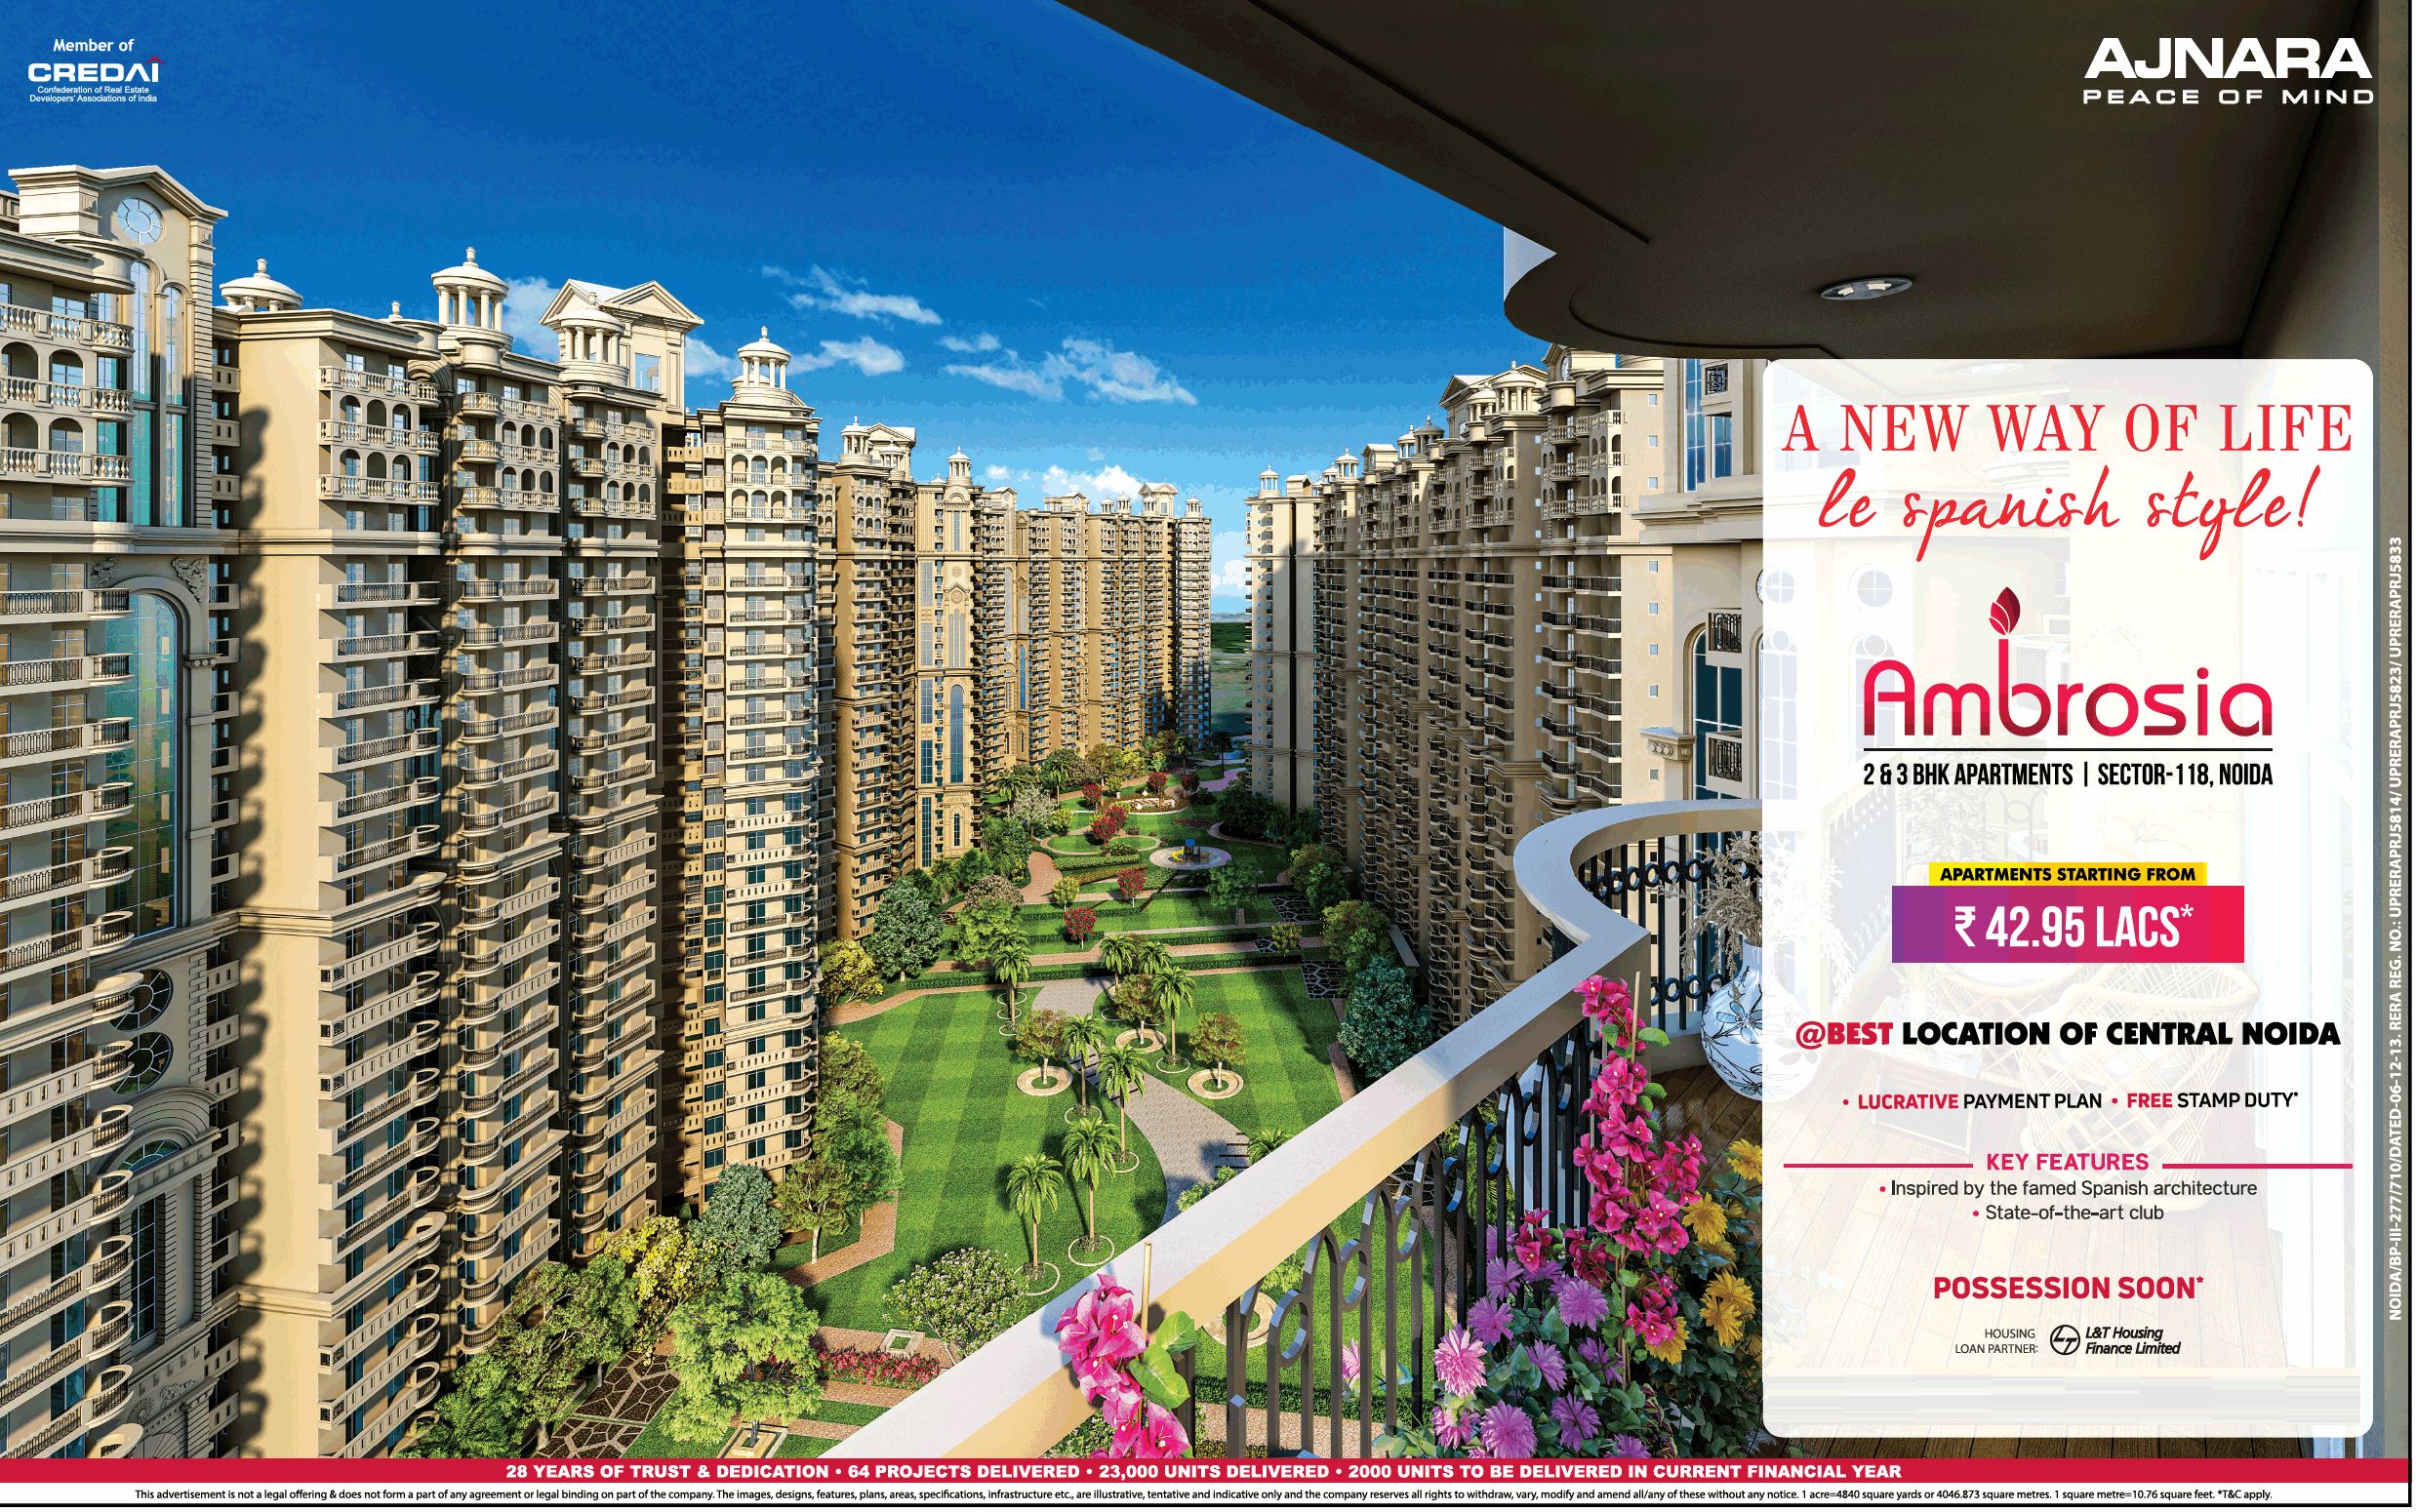 Possession soon at Ajnara Ambrosia in Sector 118, Noida Update